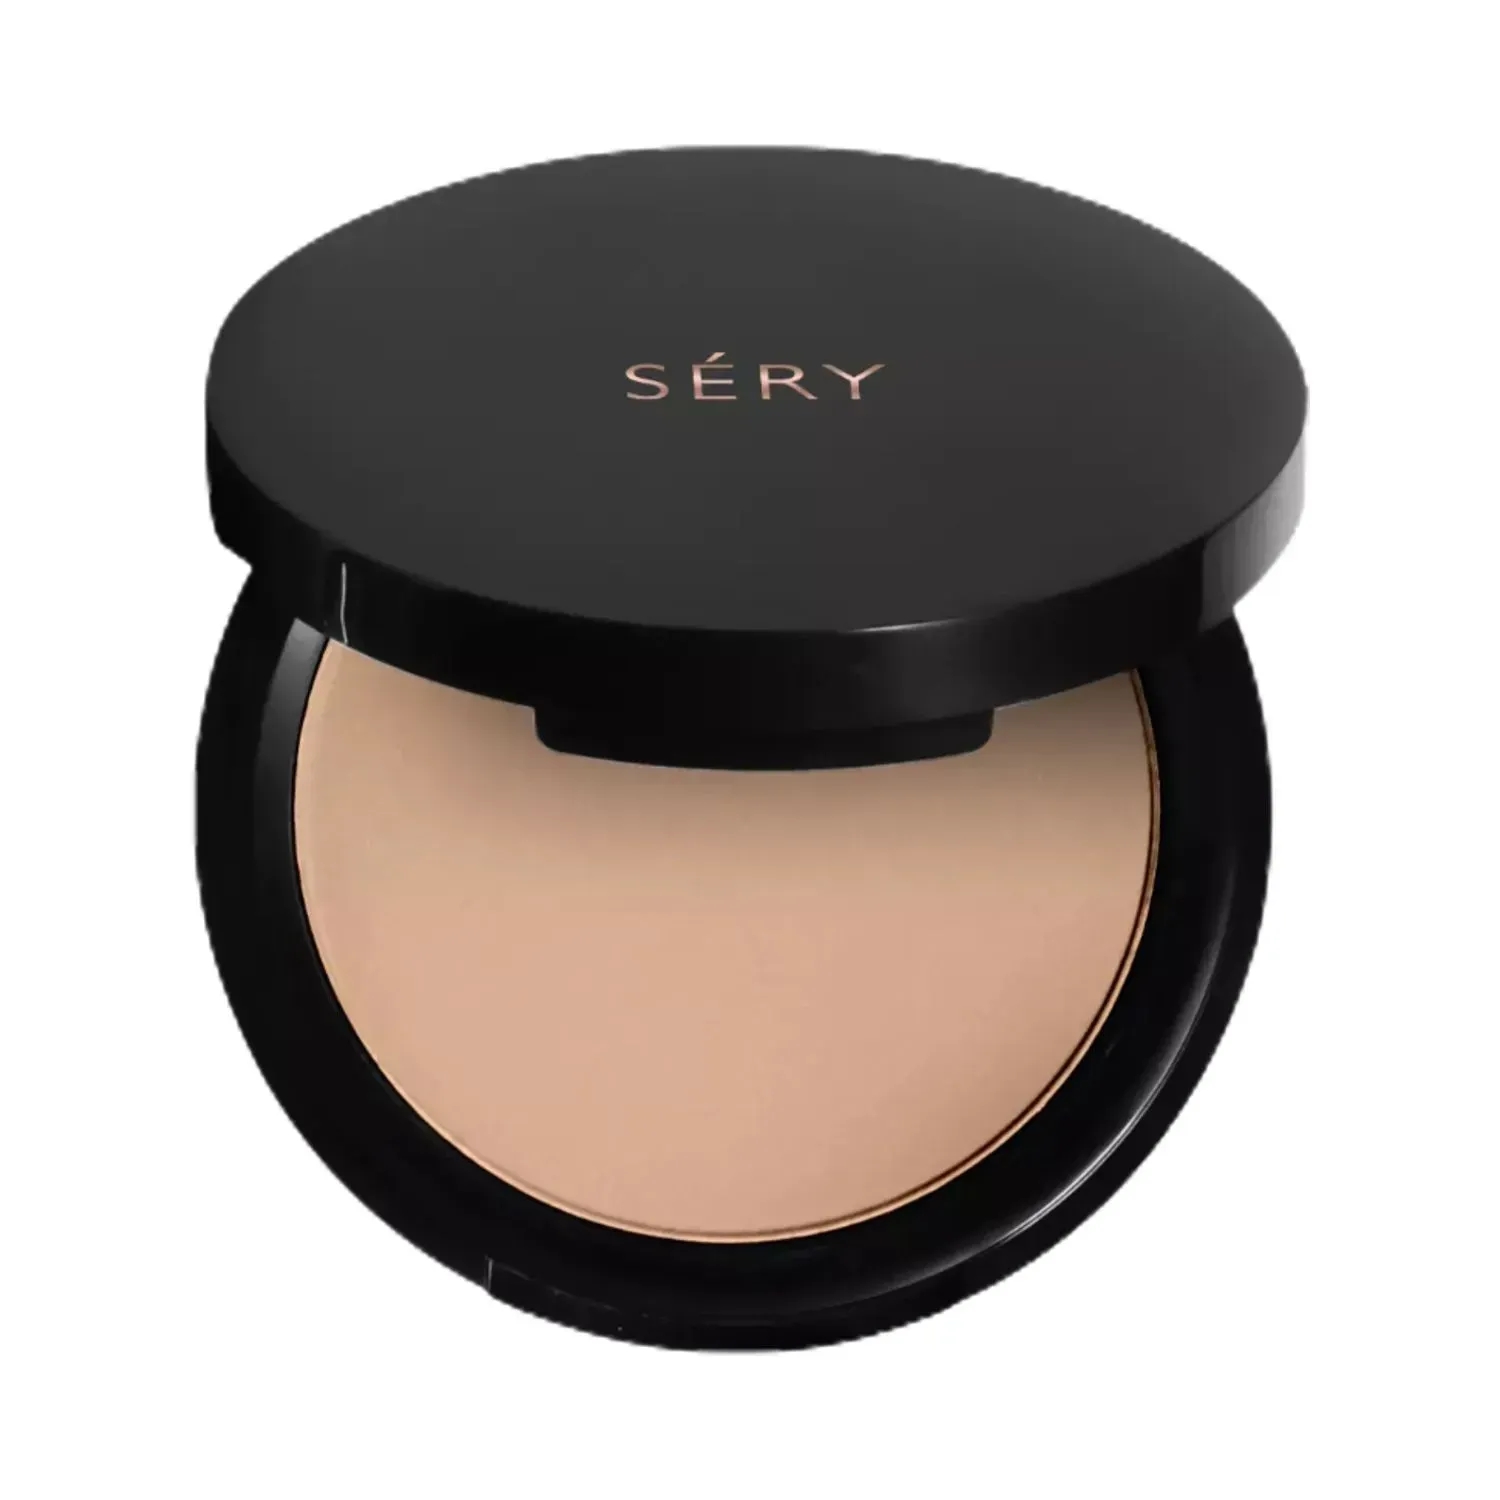 Sery | Sery Go Bare Compact Powder - Natural Beige (9g)